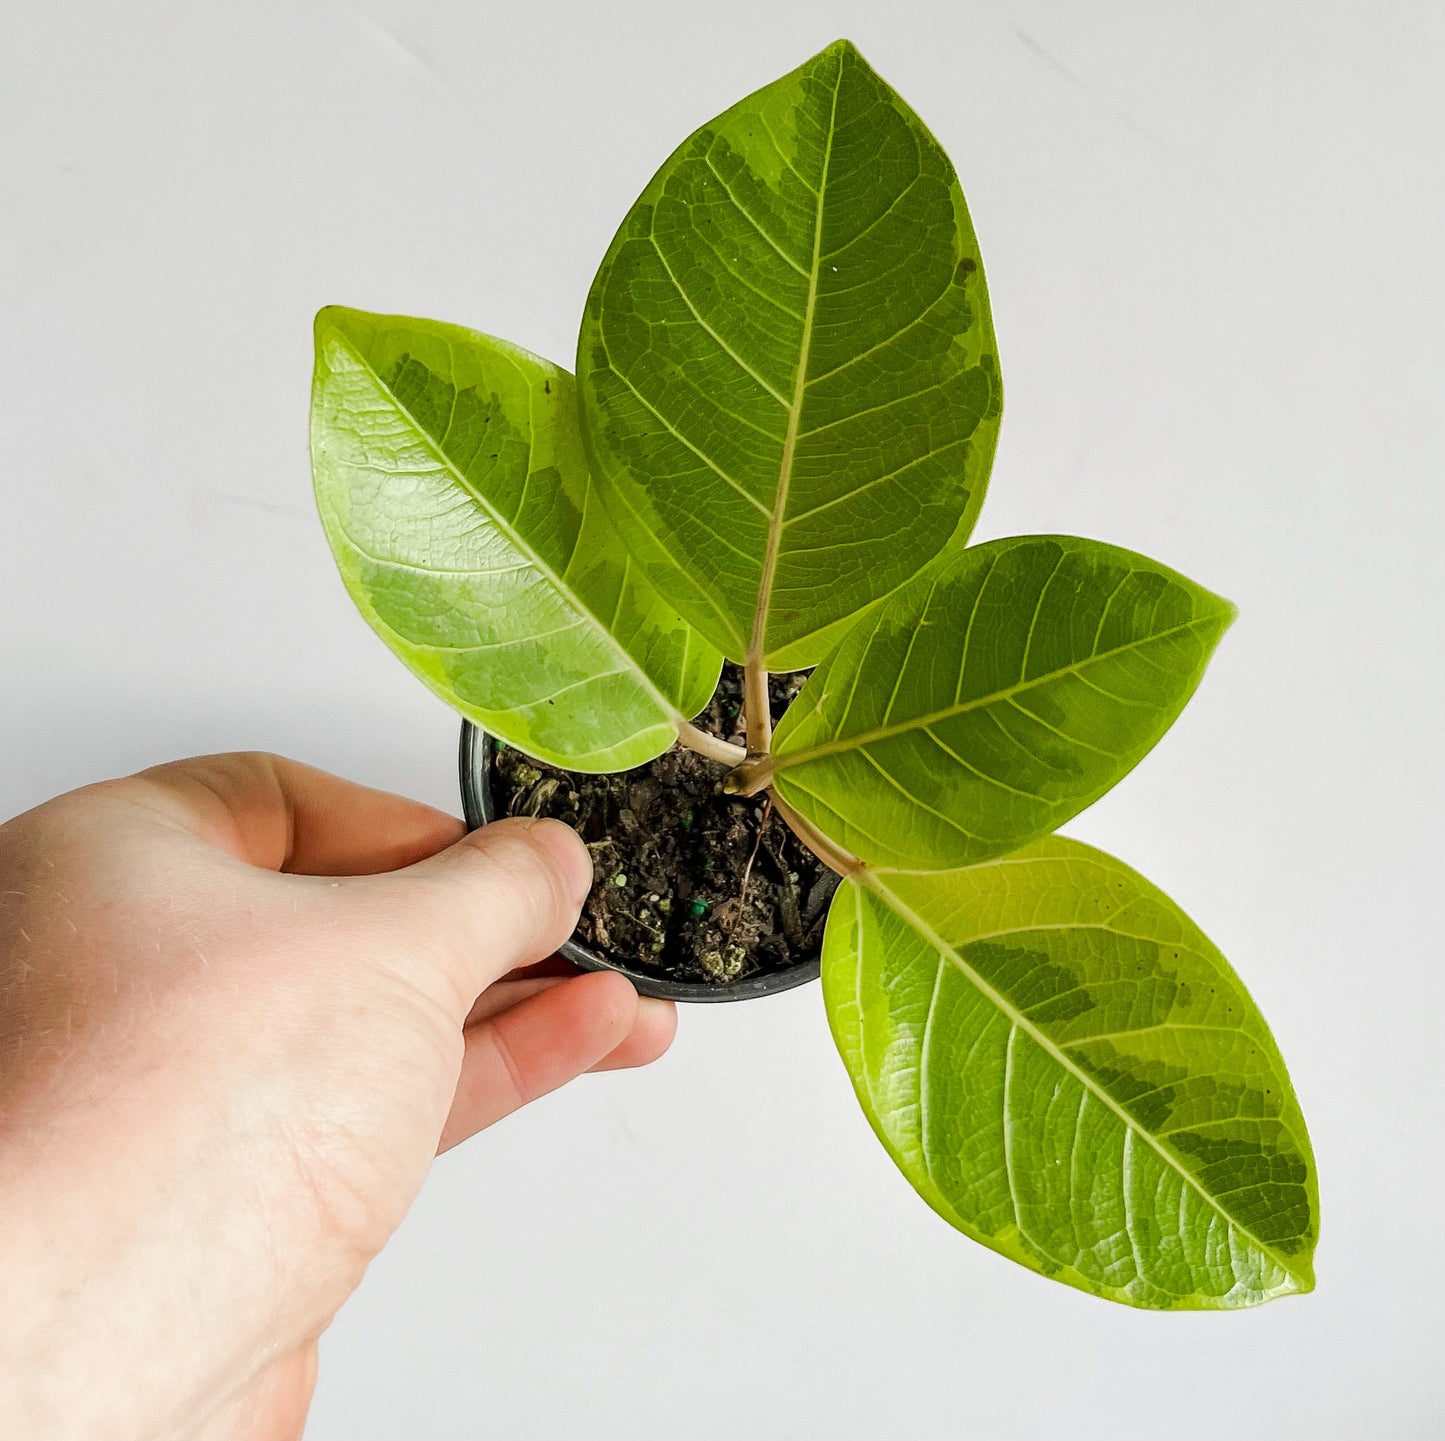 Ficus Altissima 'Yellow Gem' Rubber Tree Plant- Stunning, Vibrant, Yellow- Lime Green Variegated Leaves- Tropical Tree Houseplant (4" or 6" Pot)